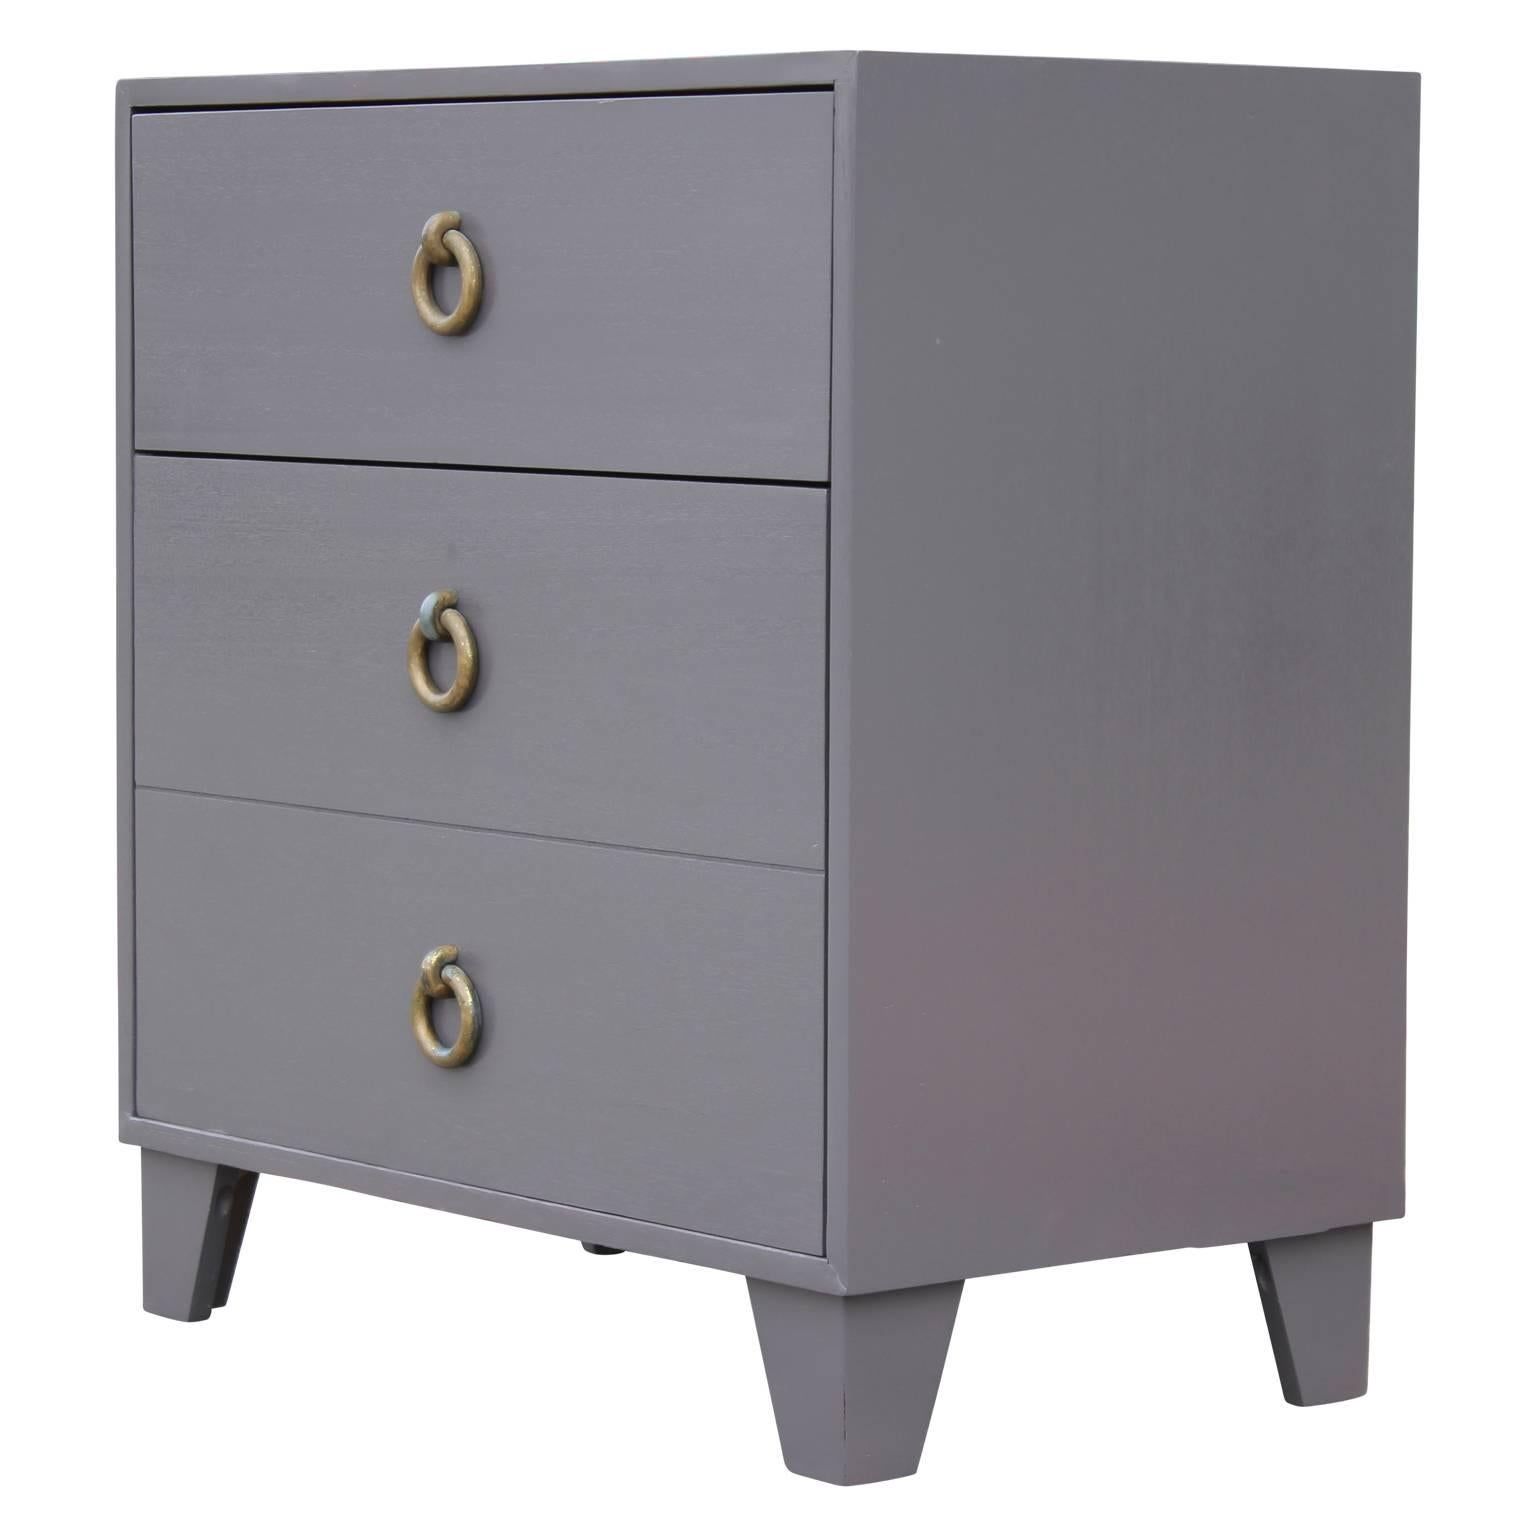 Mid-20th Century Modern Pair of Grey Lacquered Nightstands / Bachelor's Chests with Brass Handles